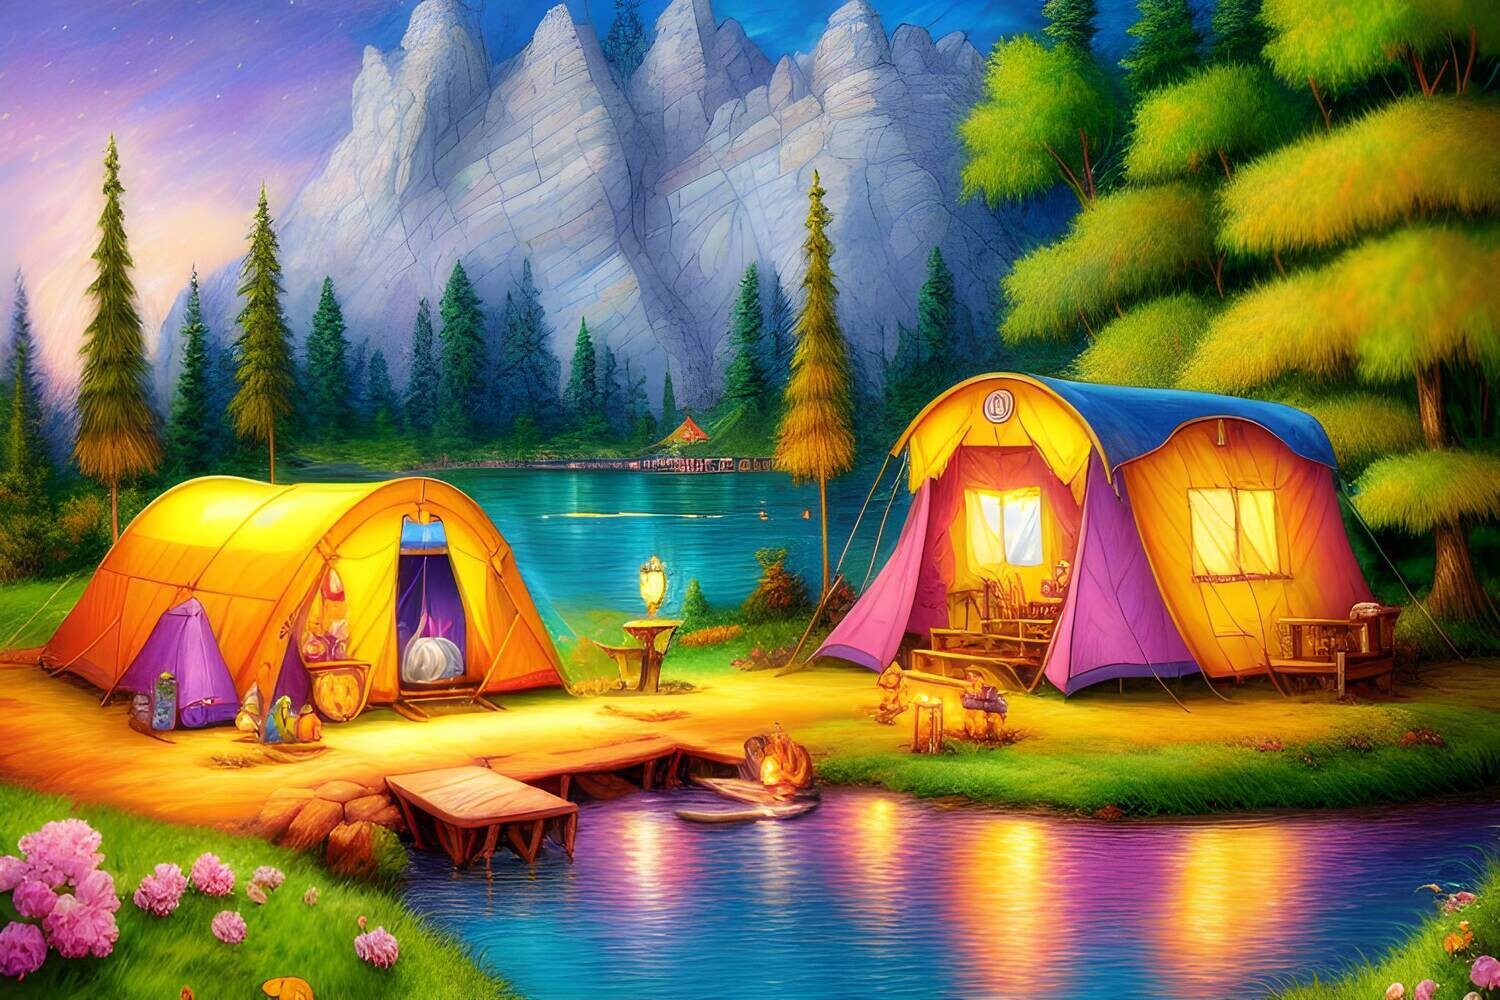 Campsite 1 - 50 x 70cm - Full Drill (square), POURED GLUE - Diamond Painting Kit - Currently in stock